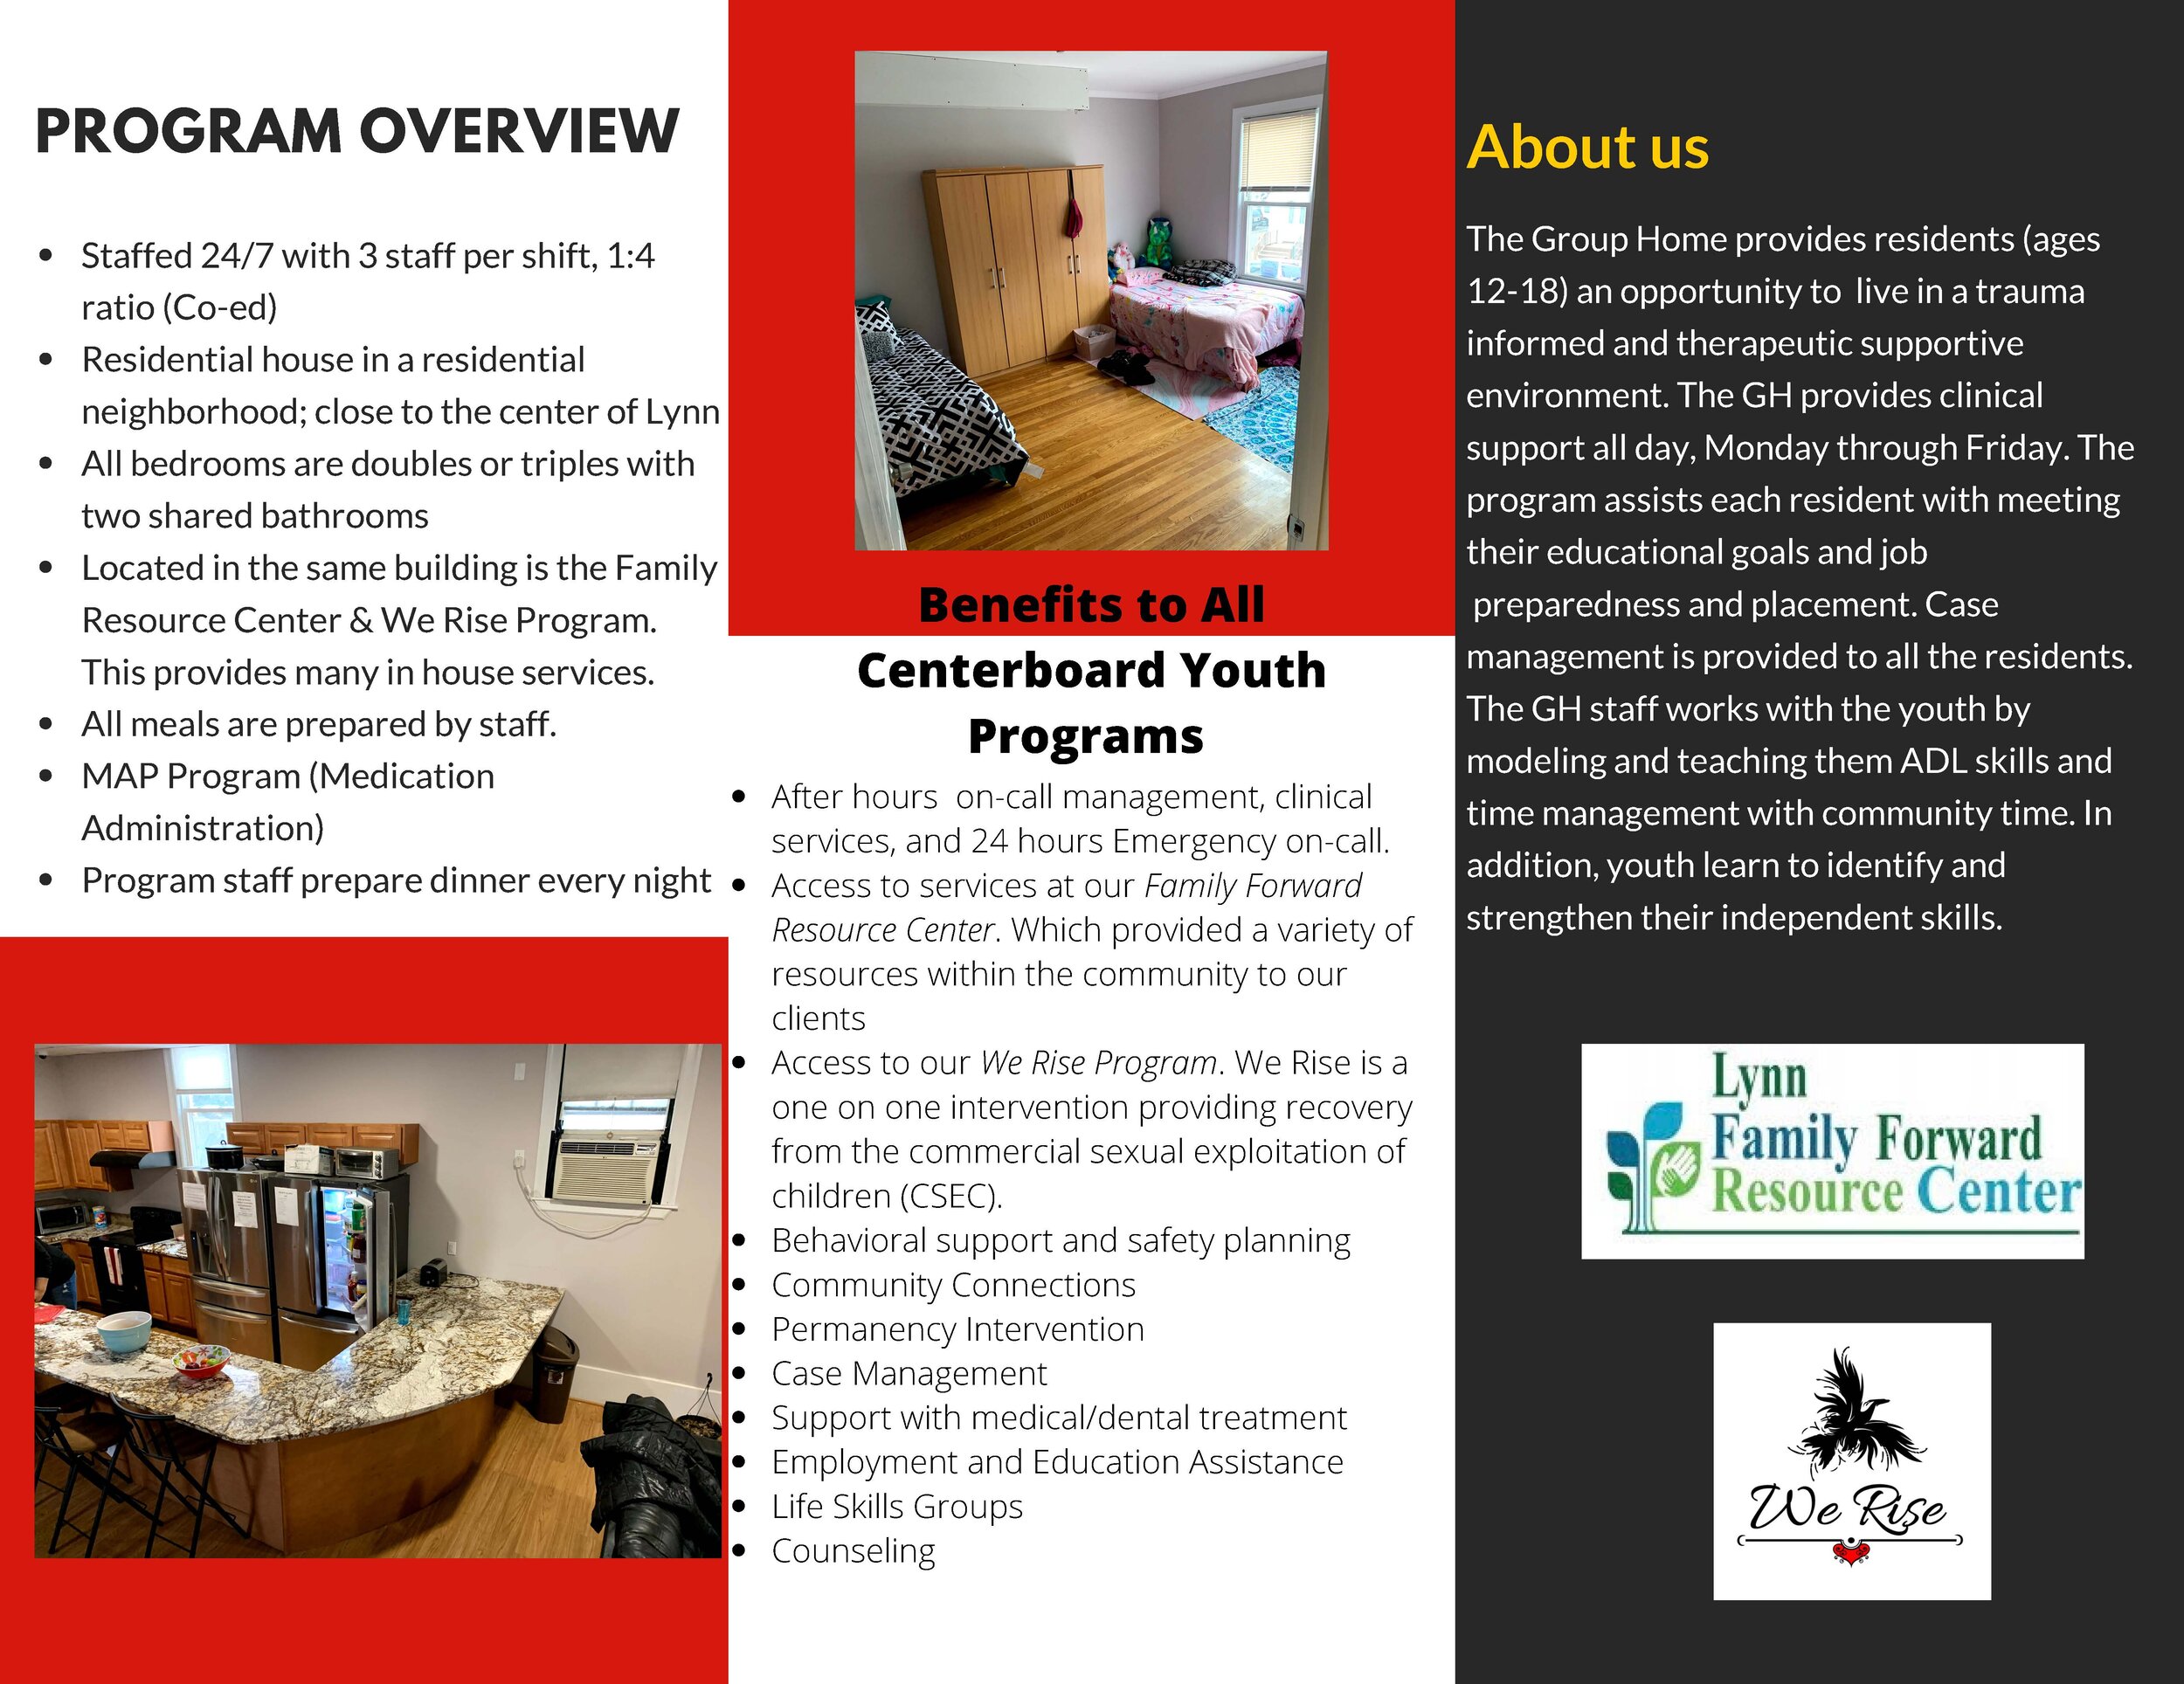 Group Home Overview Brochure JPED_Page_2.jpg